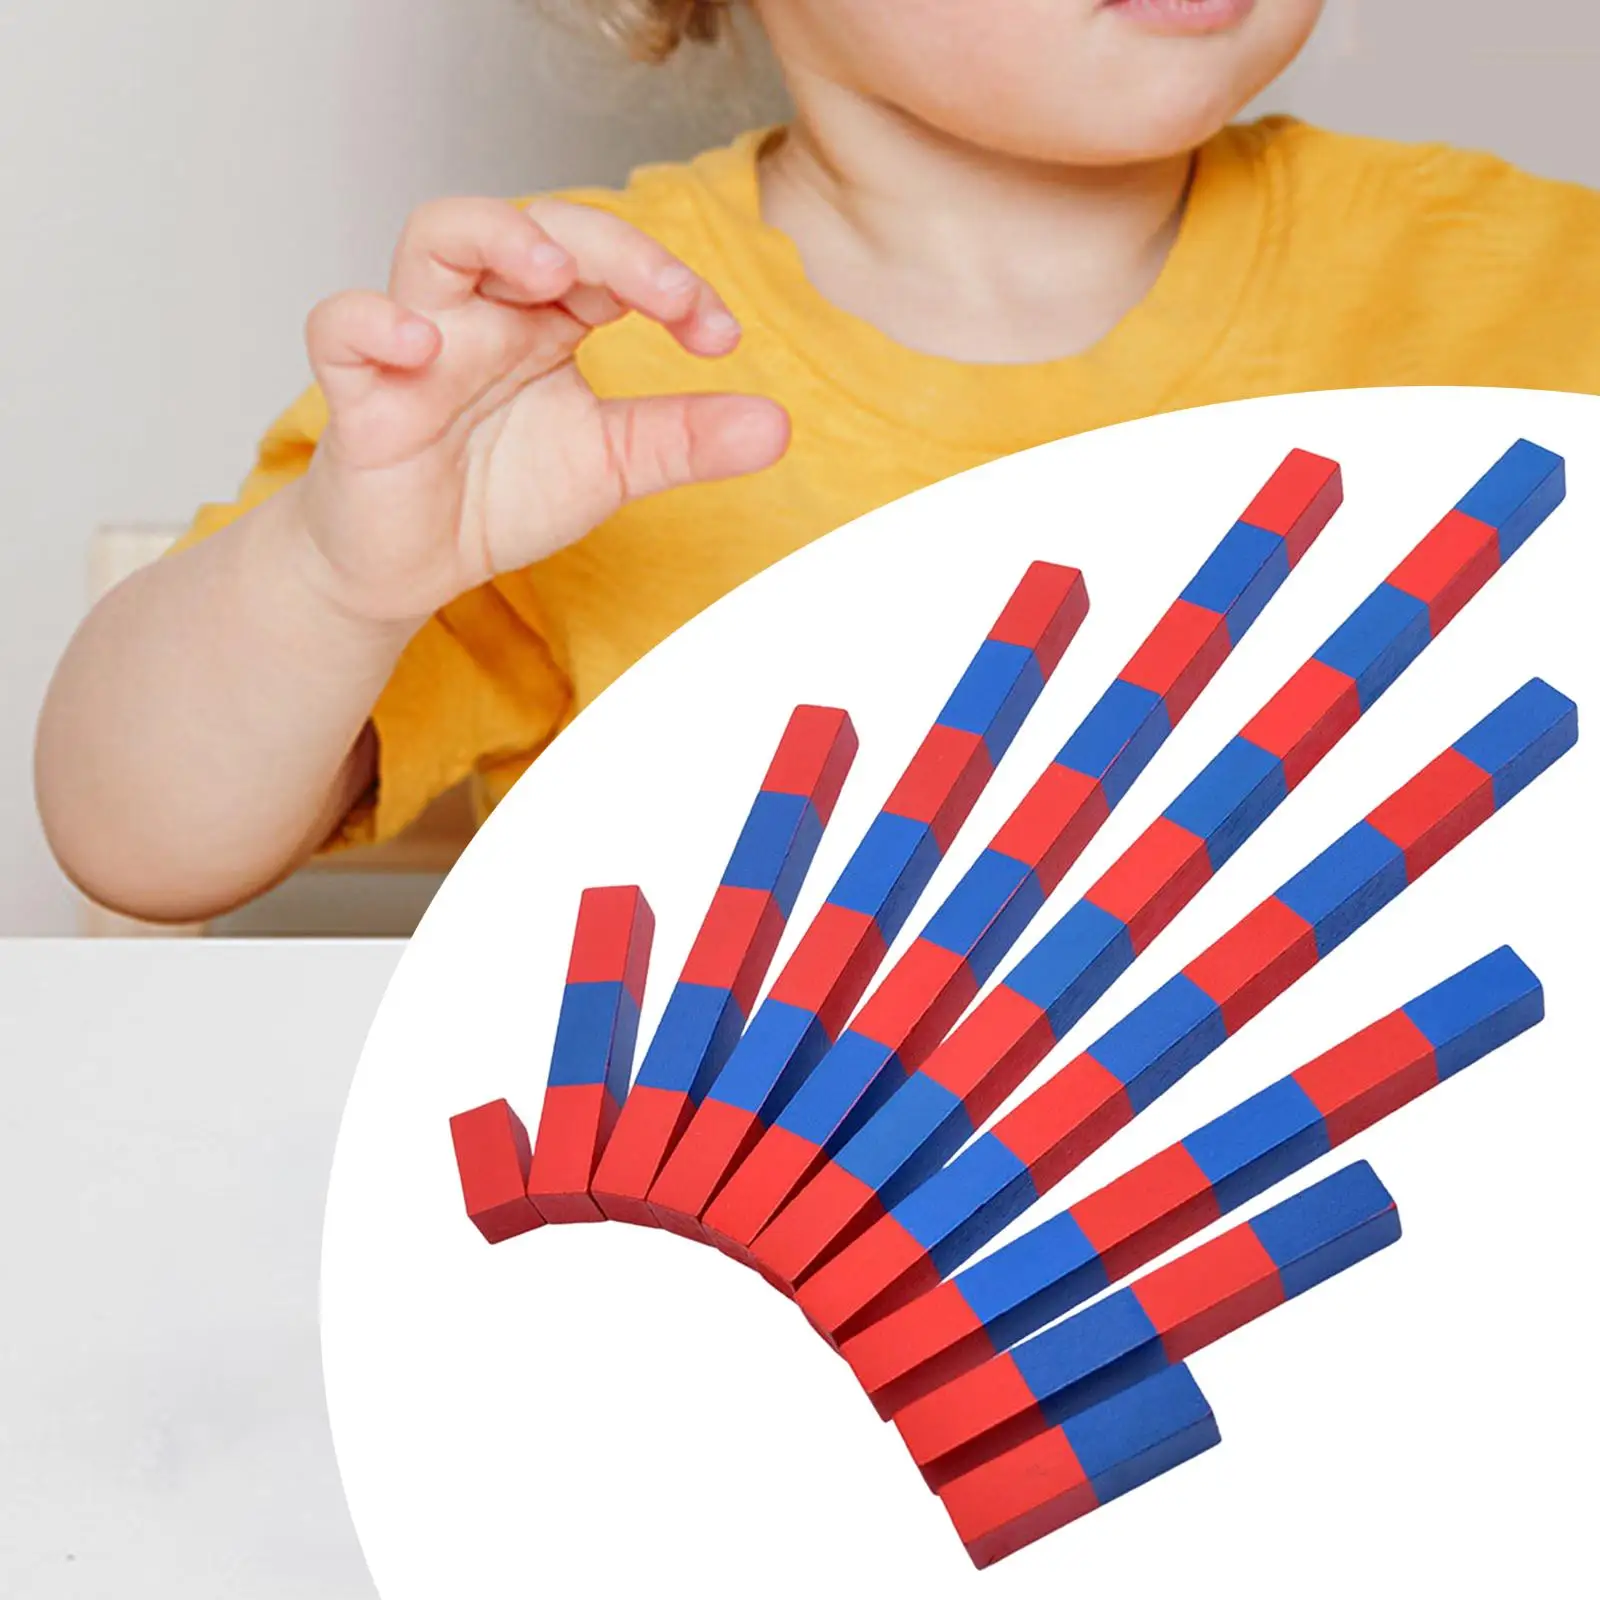 Wood Montessori Red Blue Number Rods Counting Sticks Practical Number Match Puzzle Cognition Mathematic Aid for Daycare Holiday